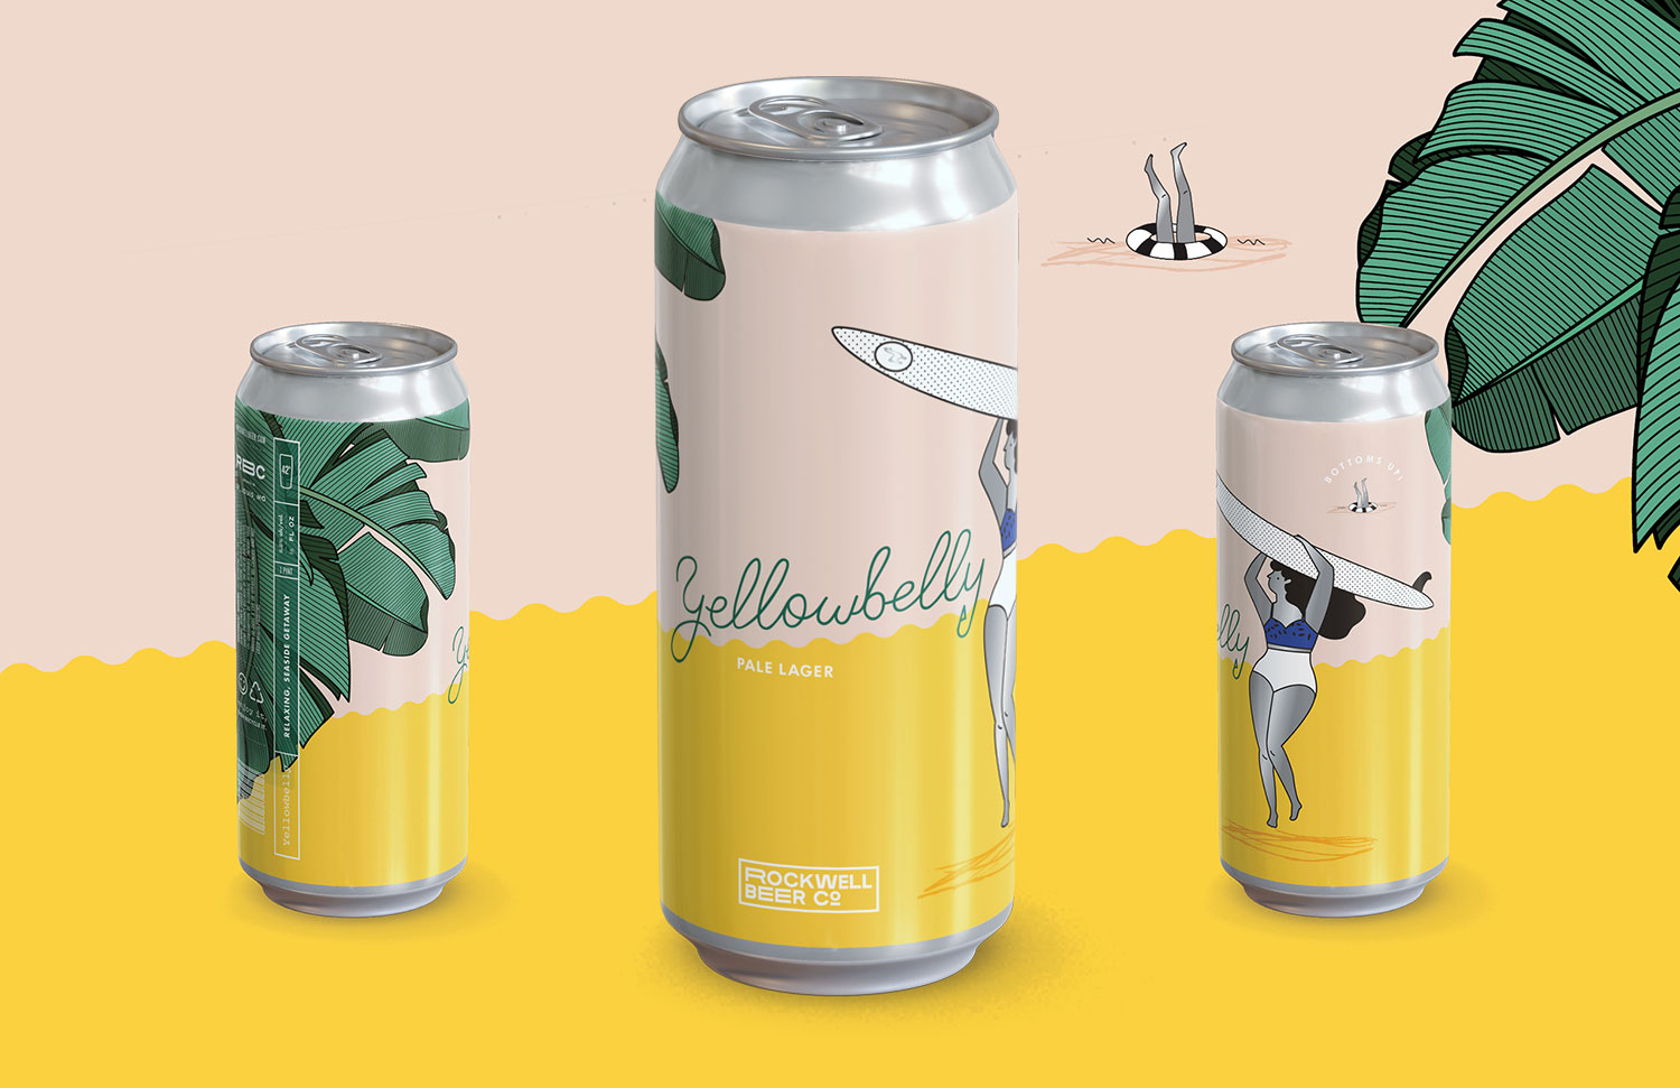 Rockwell Beer Co. Yellowbelly Cans